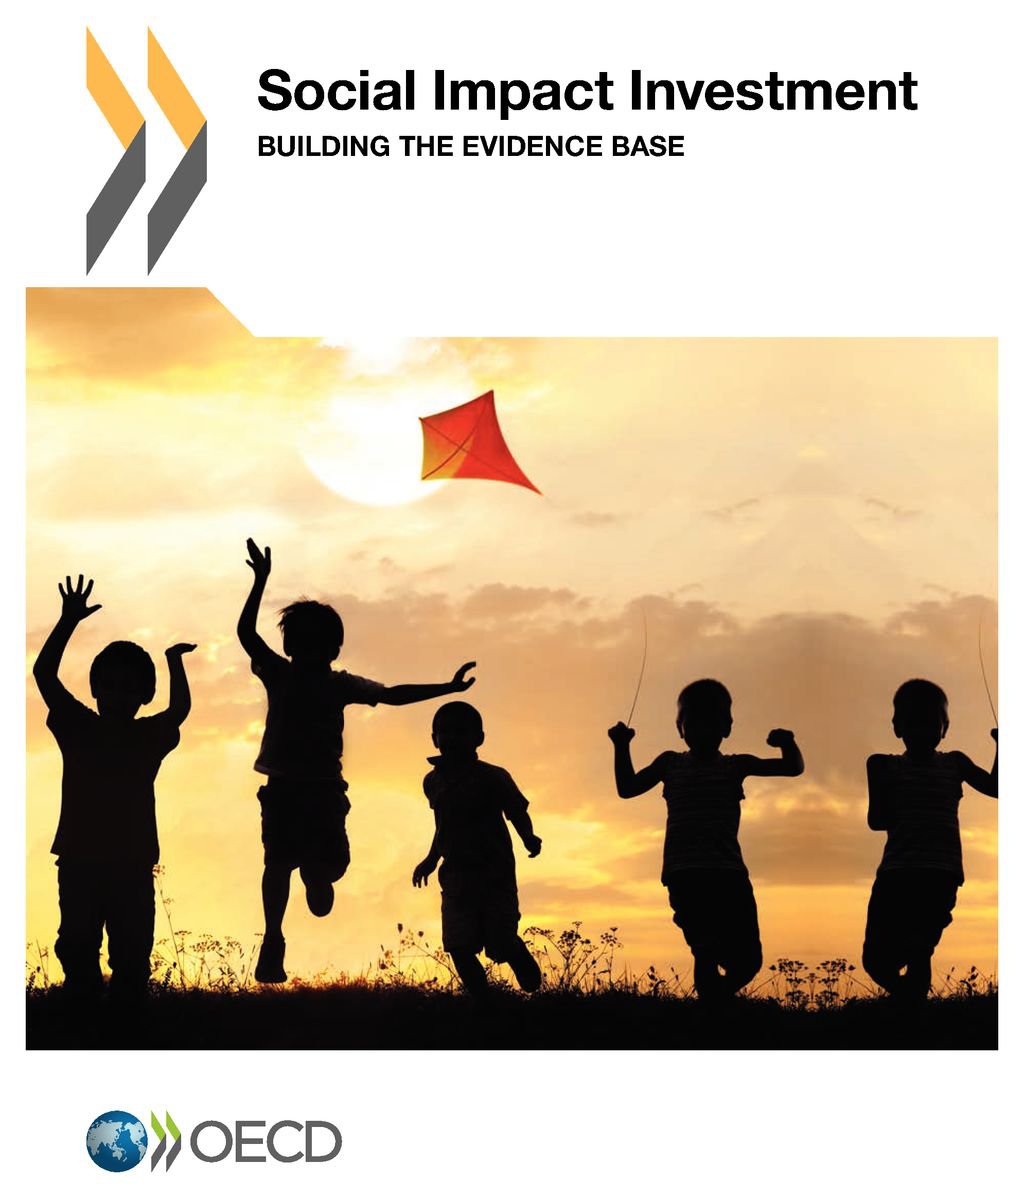 social-impact-investmen-building-the-evidence-base-2015